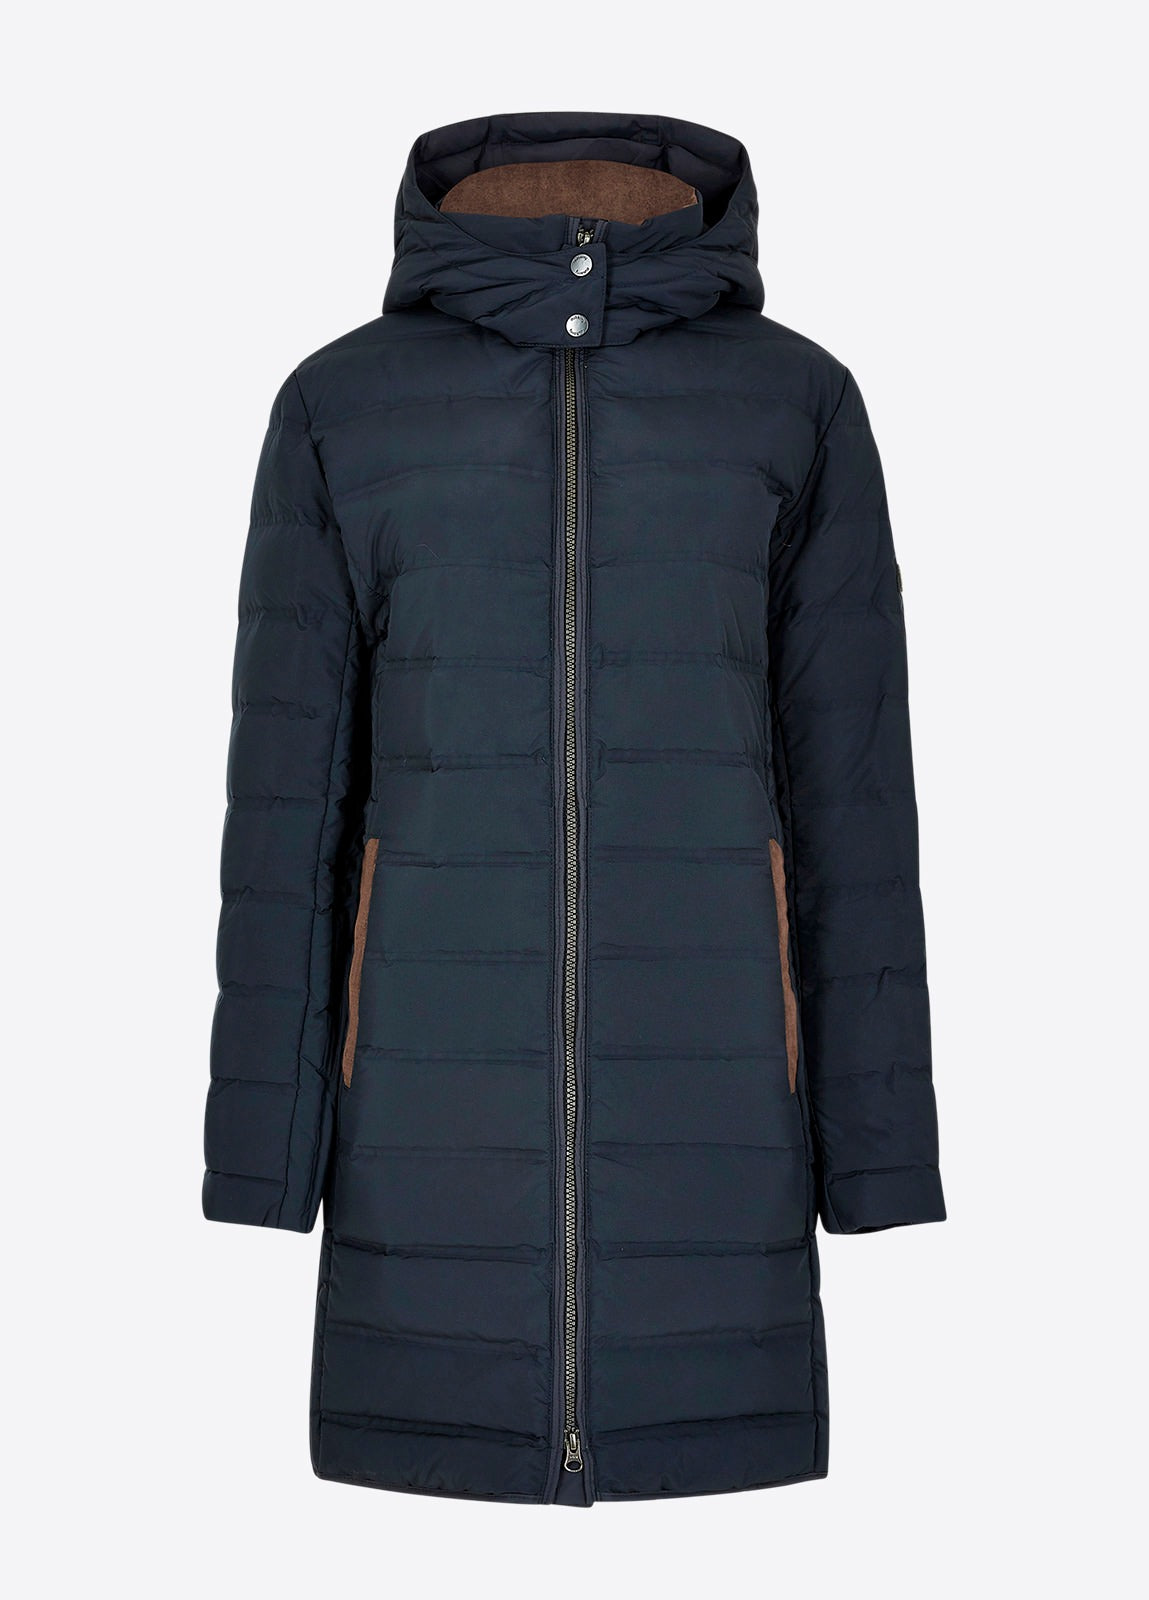 Dubarry Ballybrophy Quilted Jacket